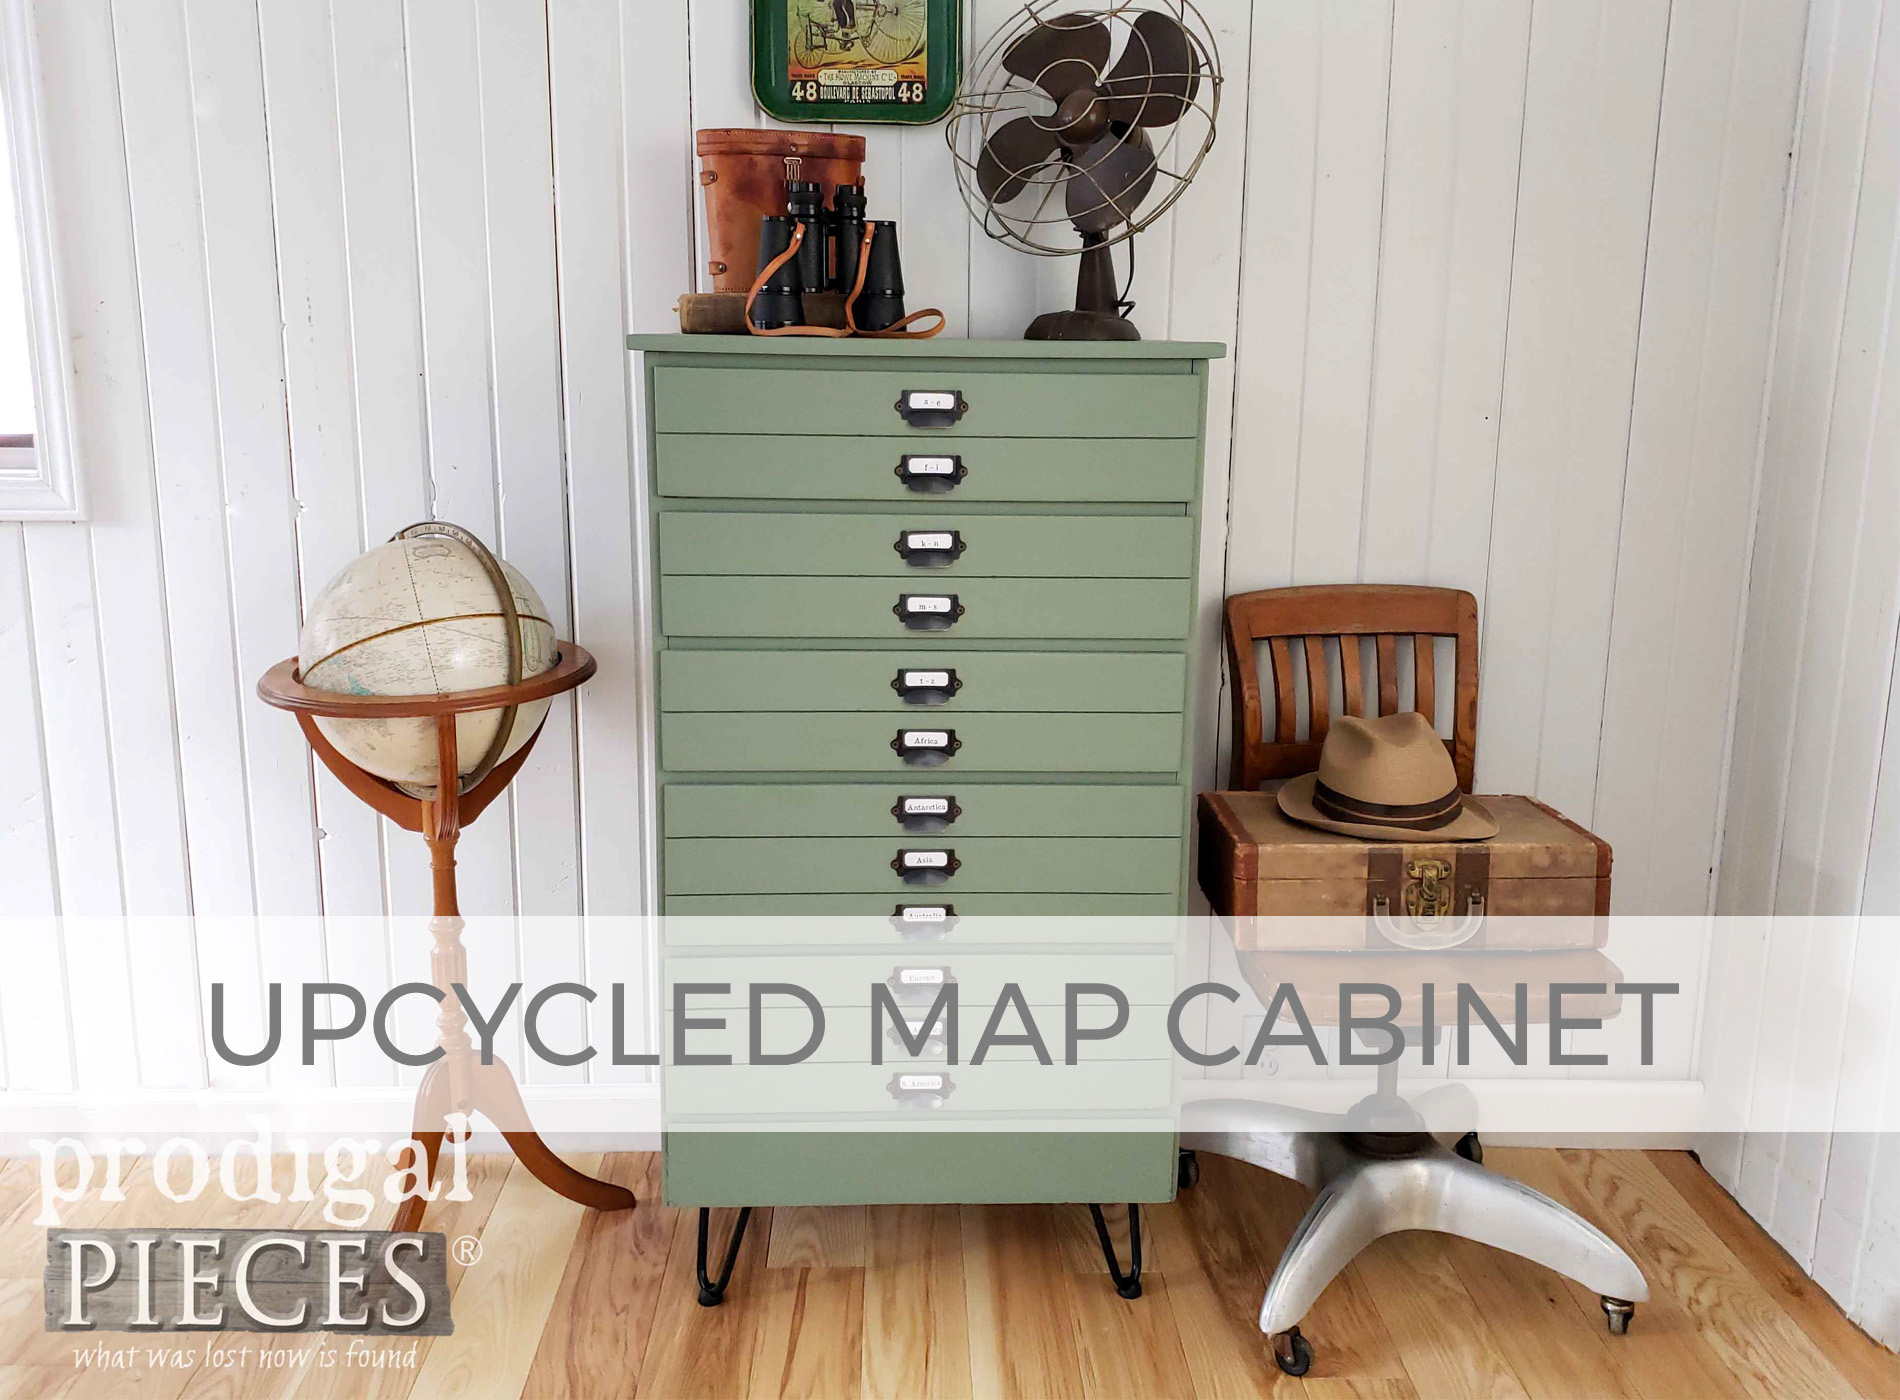 Upcycled Chest of Drawers into a Map Cabinet by Larissa of Prodigal Pieces | prodigalpieces.com #prodigalpieces